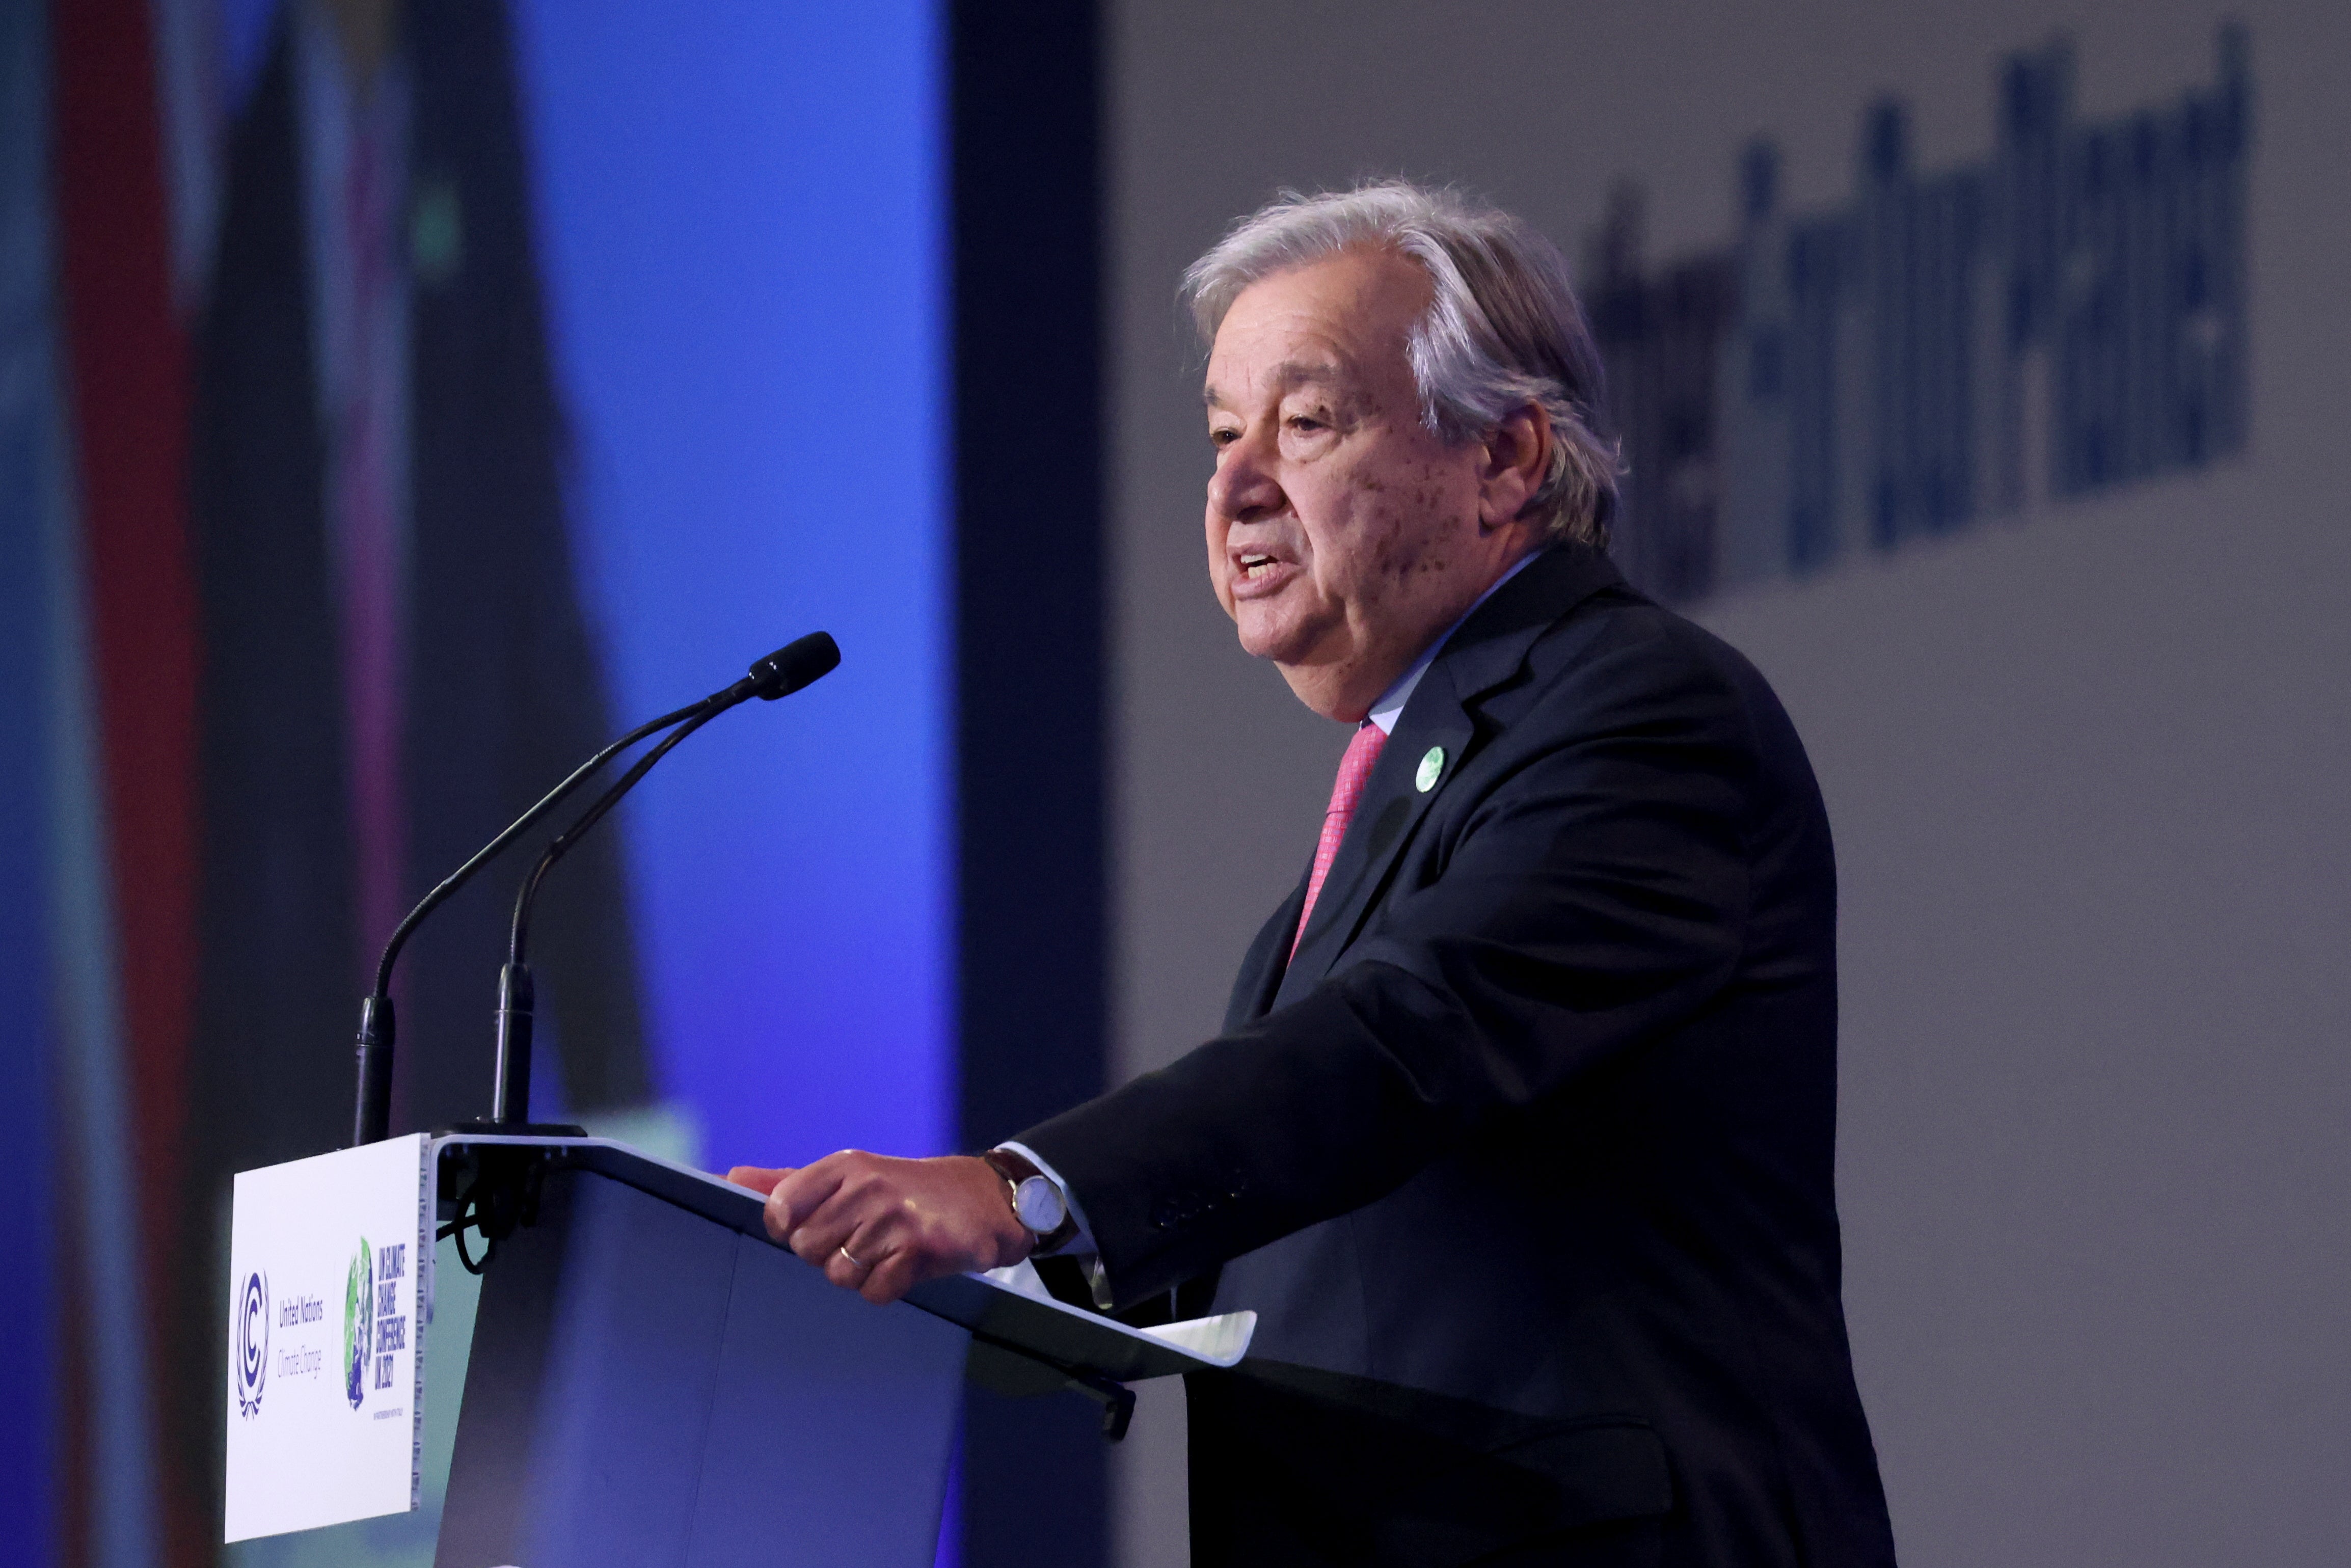 UN Secretary-General Antonio Guterres delivers a speech during the opening ceremony of the UN Climate Change Conference COP26 at SECC on November 1 2021